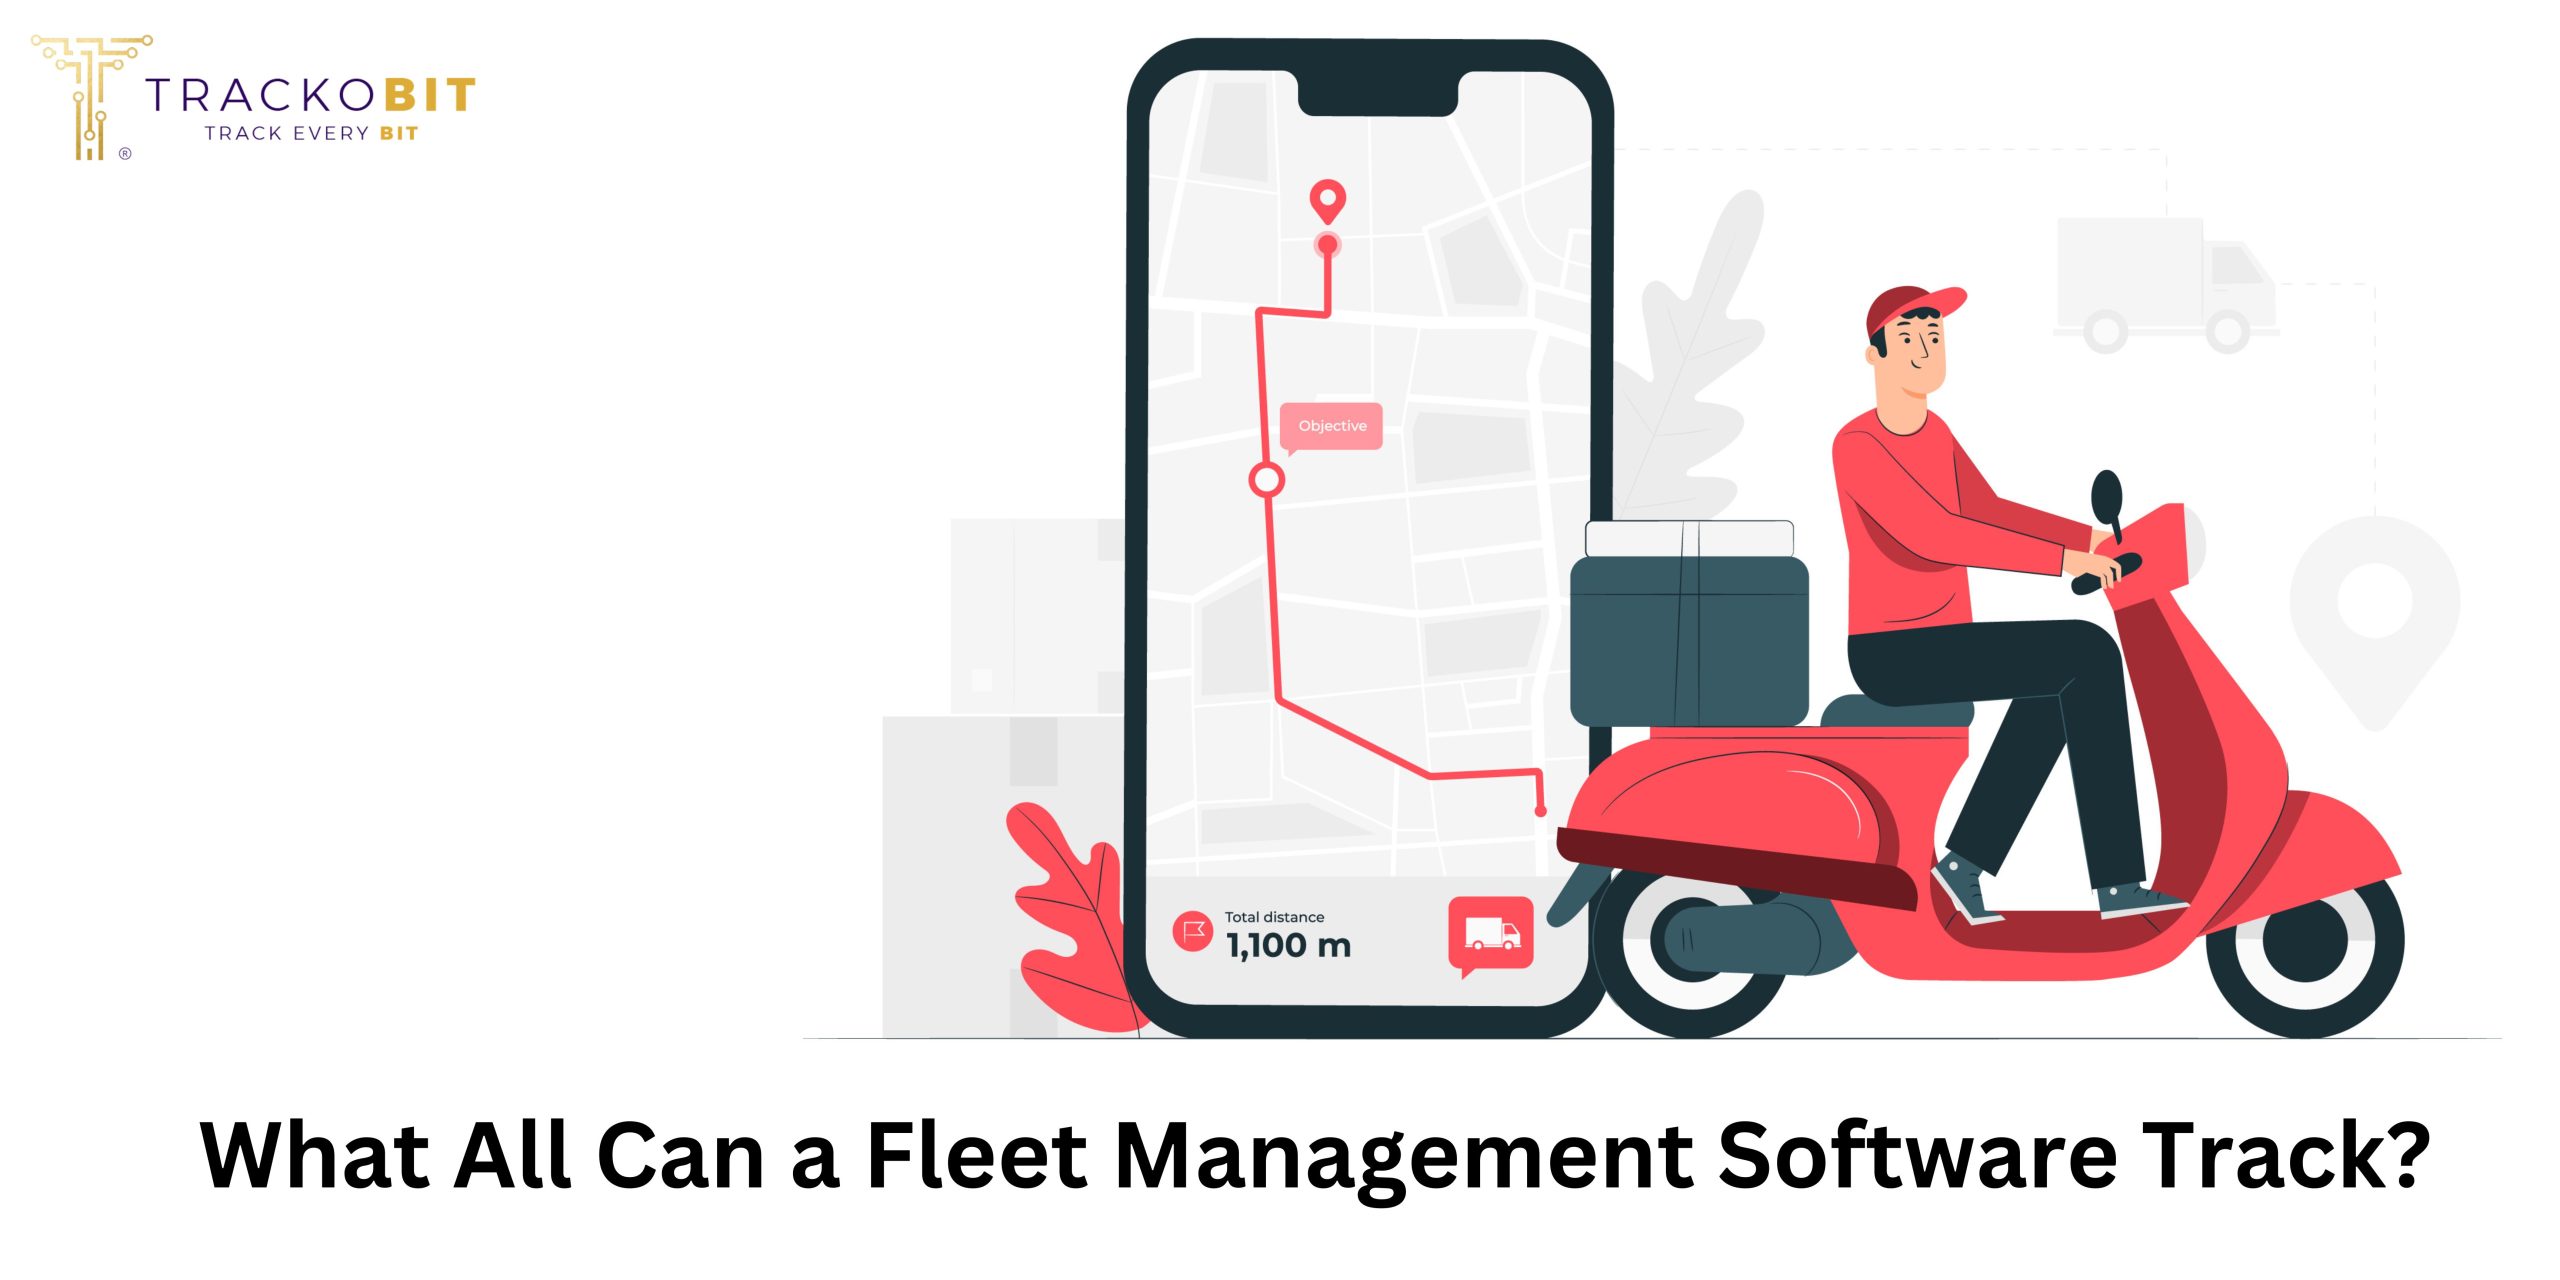 What All Can a Fleet Management Software Track